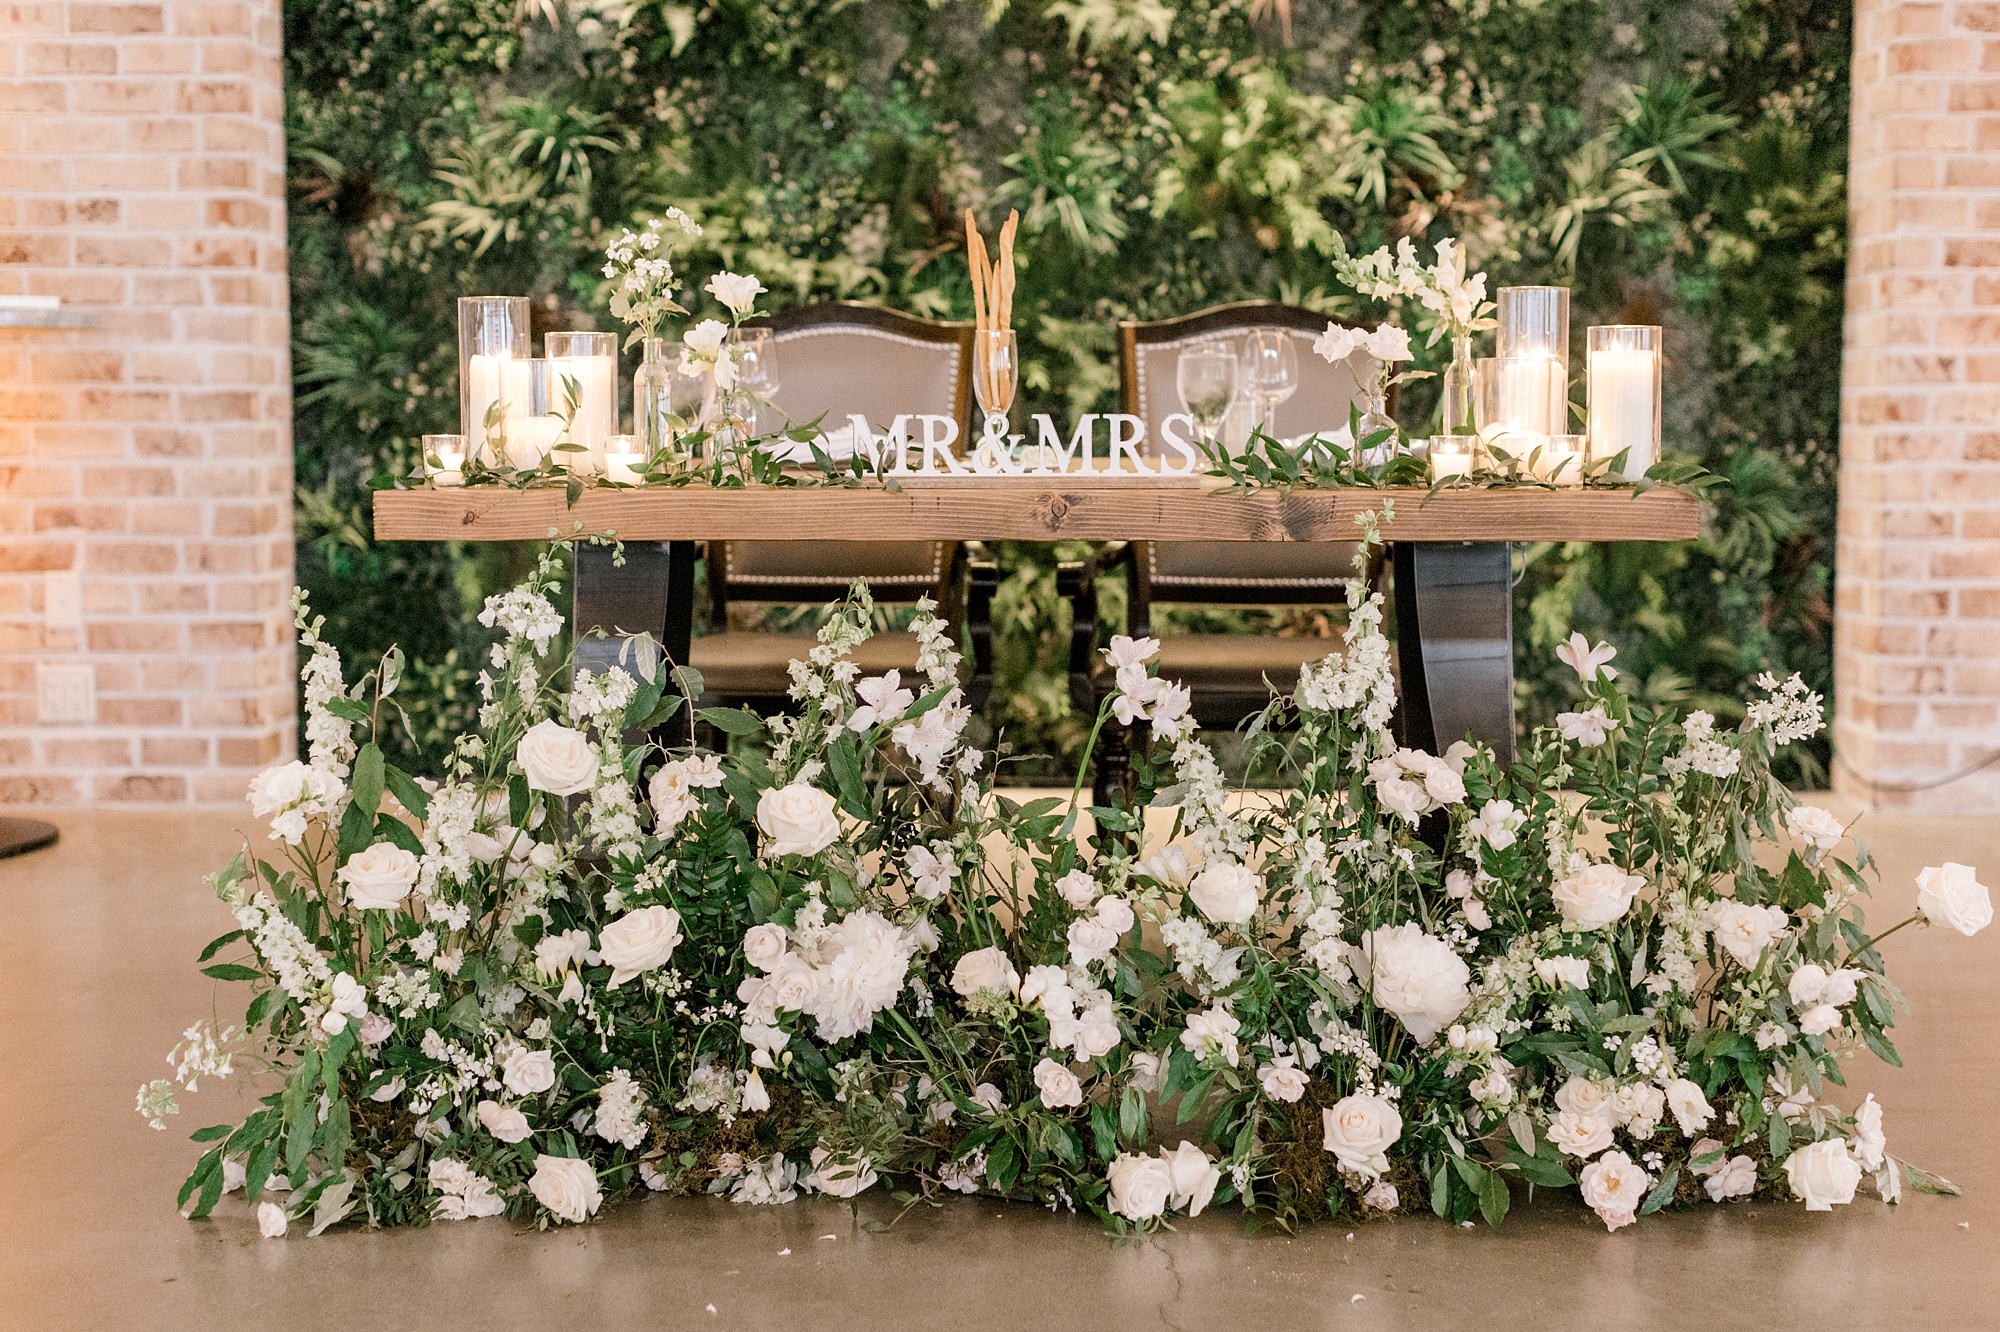 sweetheart table with white flowers all along bottom